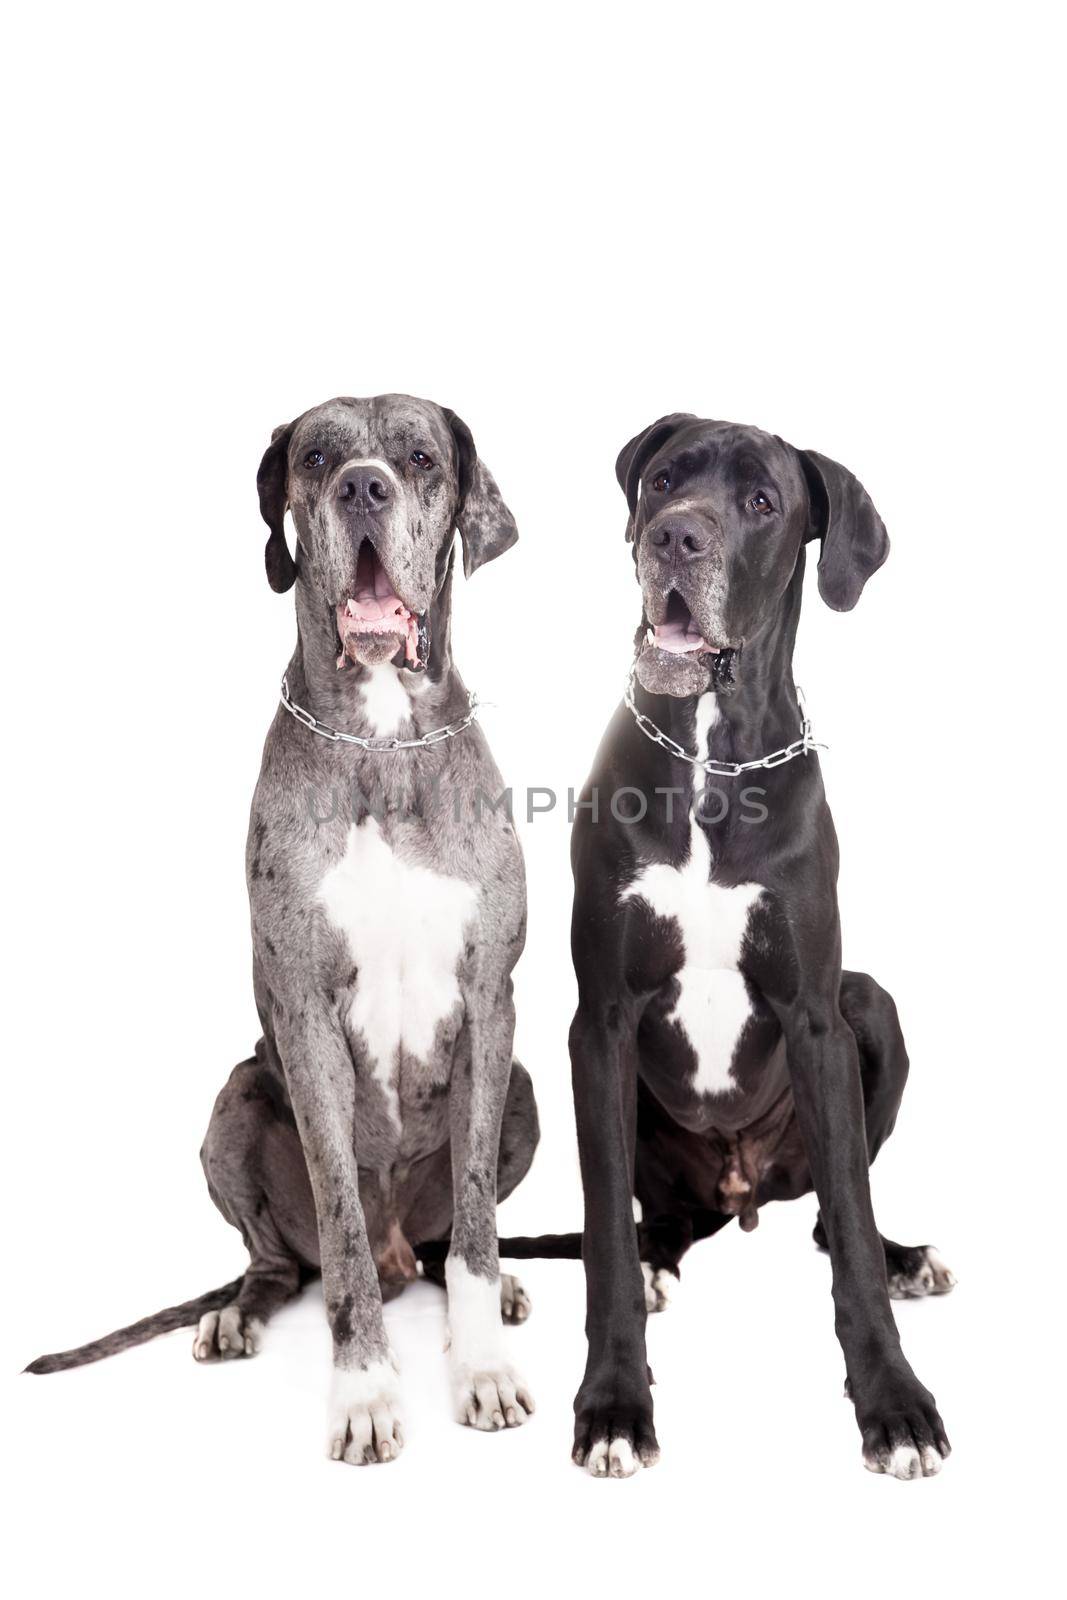 Two great Dane dogs on white by RosaJay